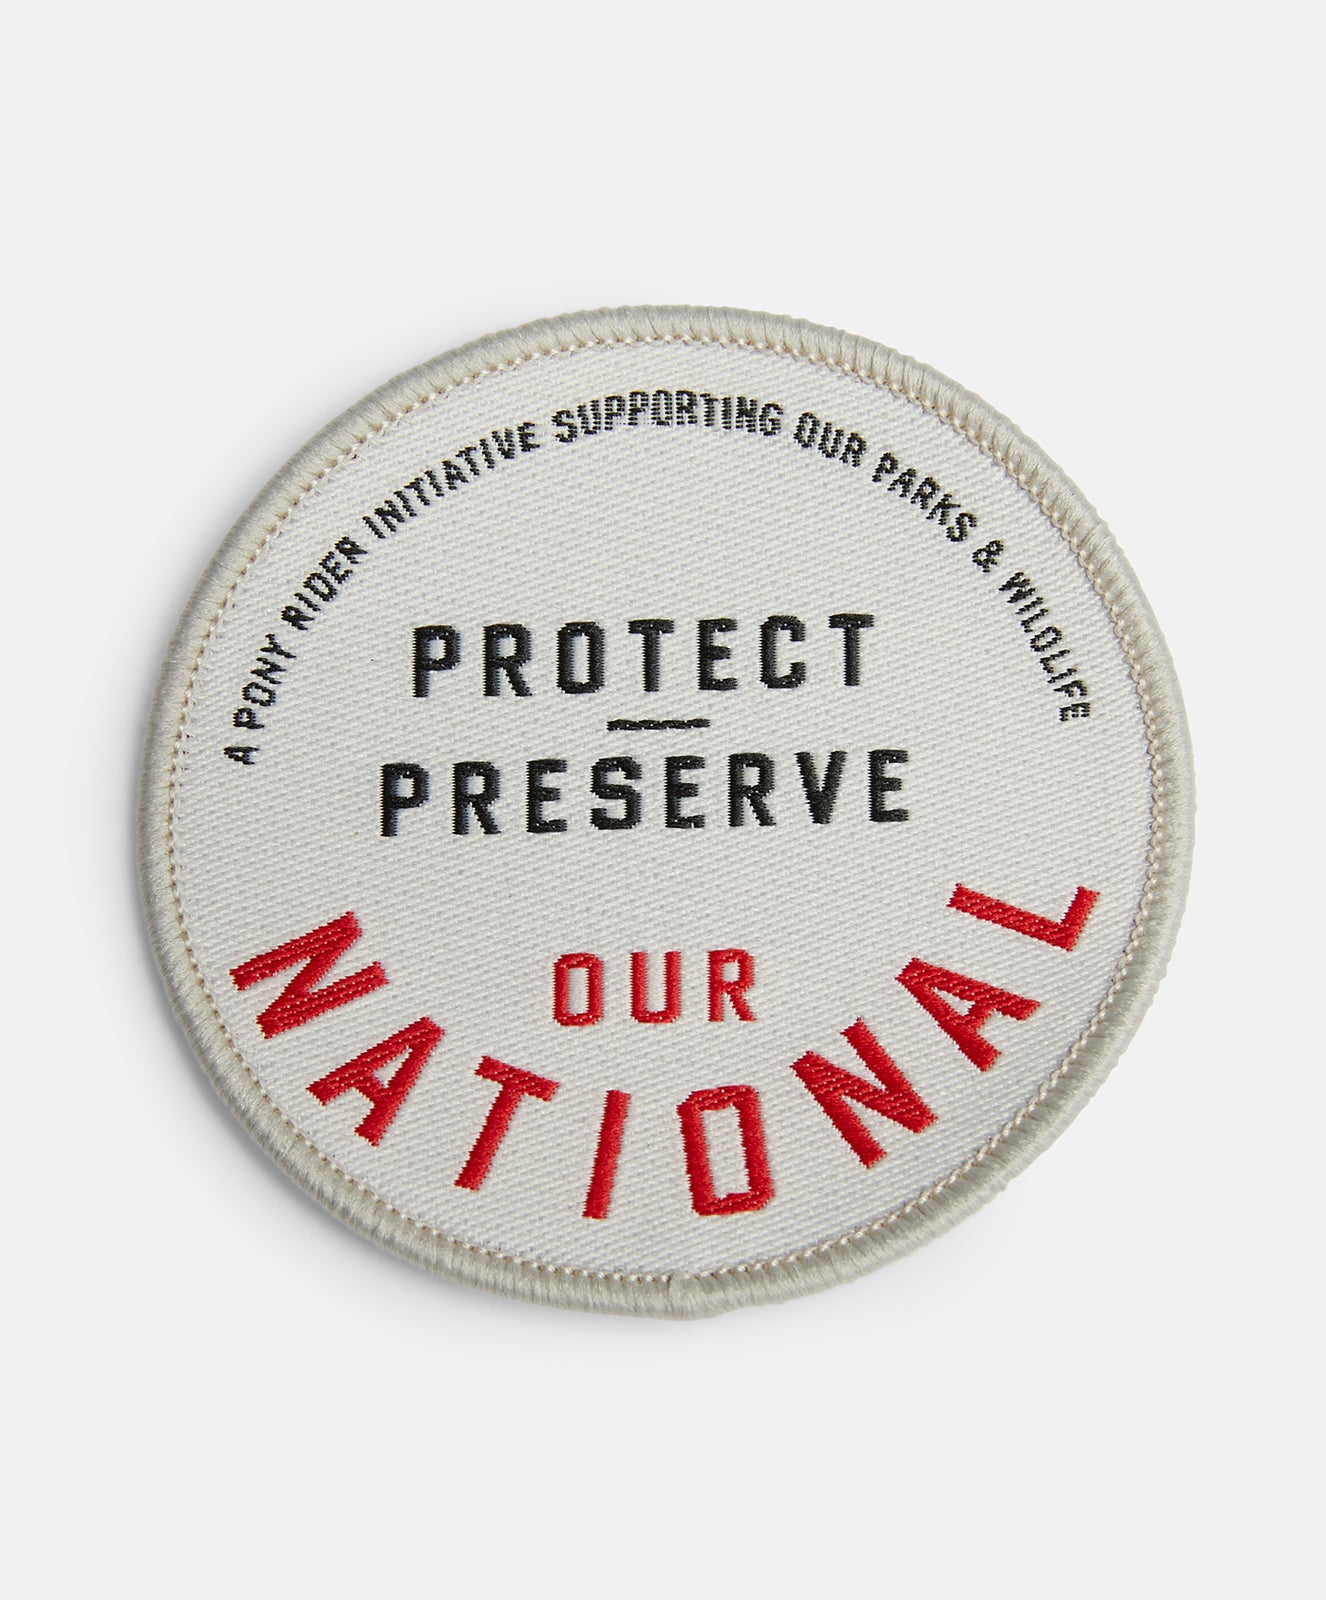 Our National Patch